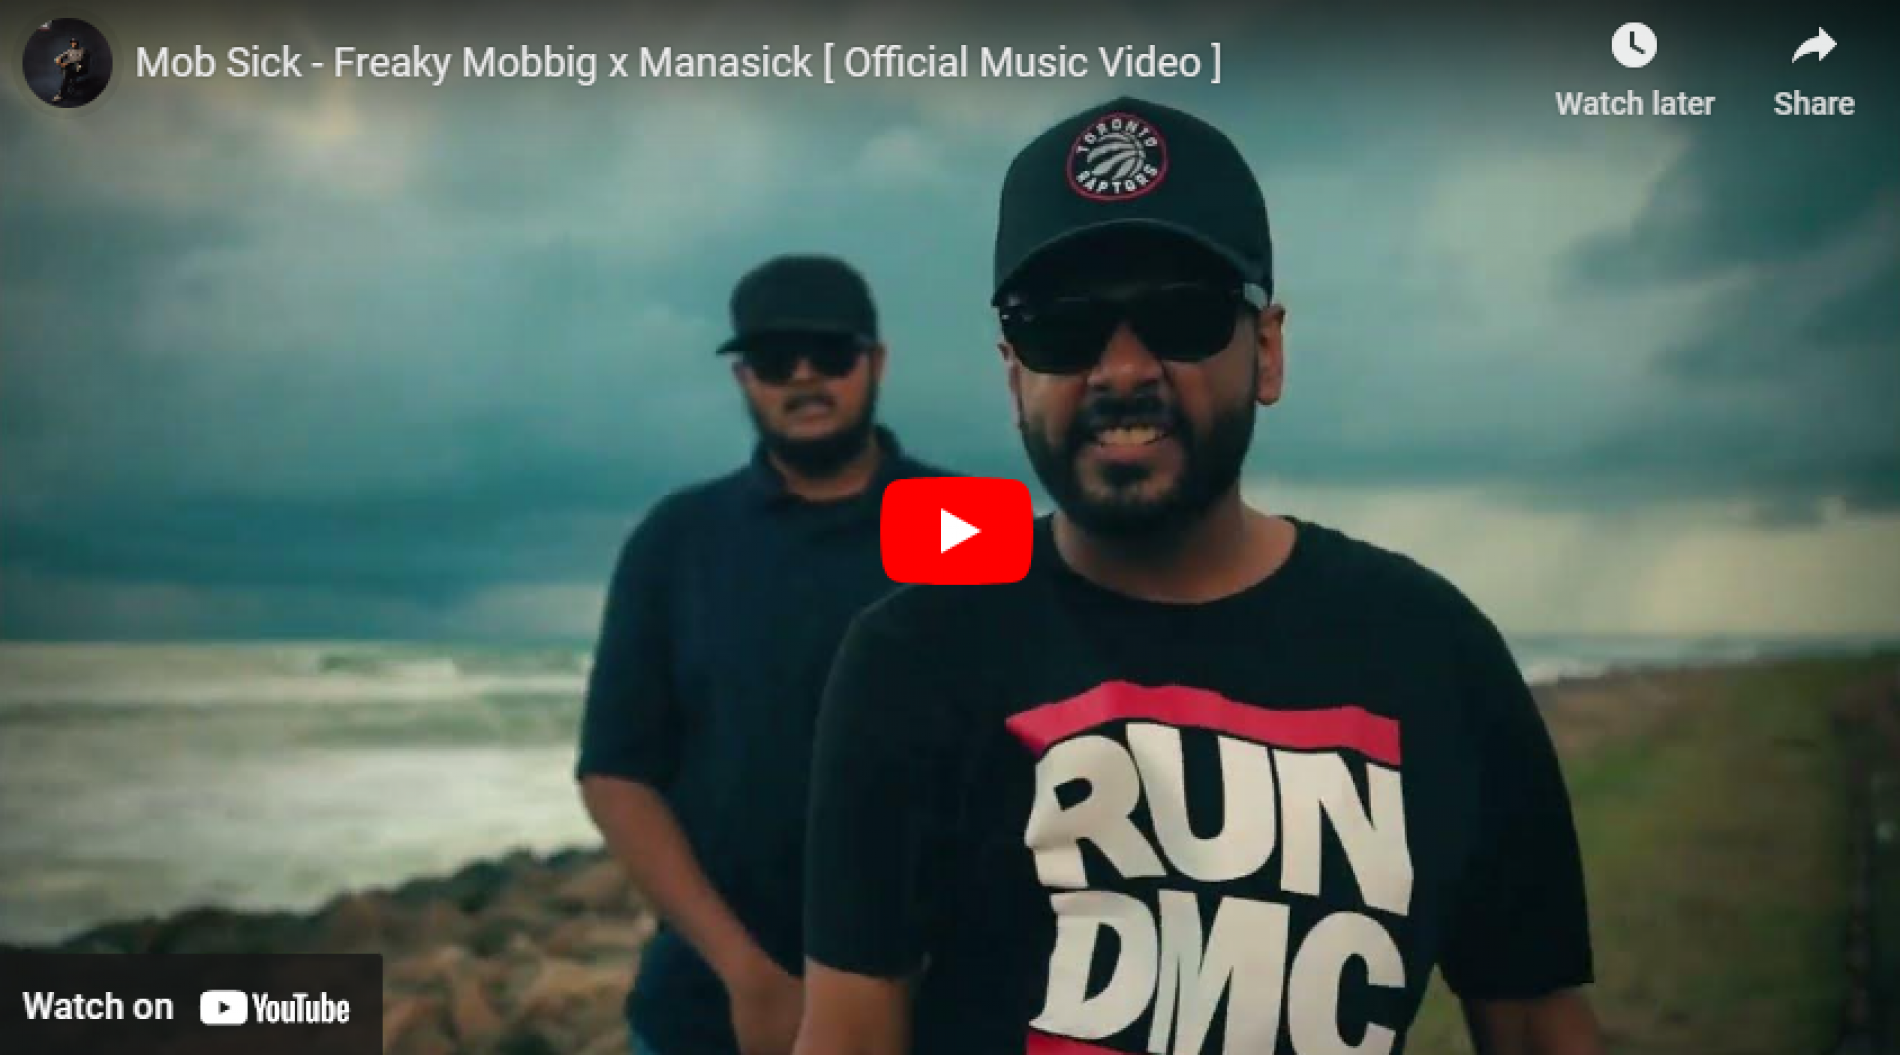 New Music : Mob Sick – Freaky Mobbig x Manasick [ Official Music Video ]